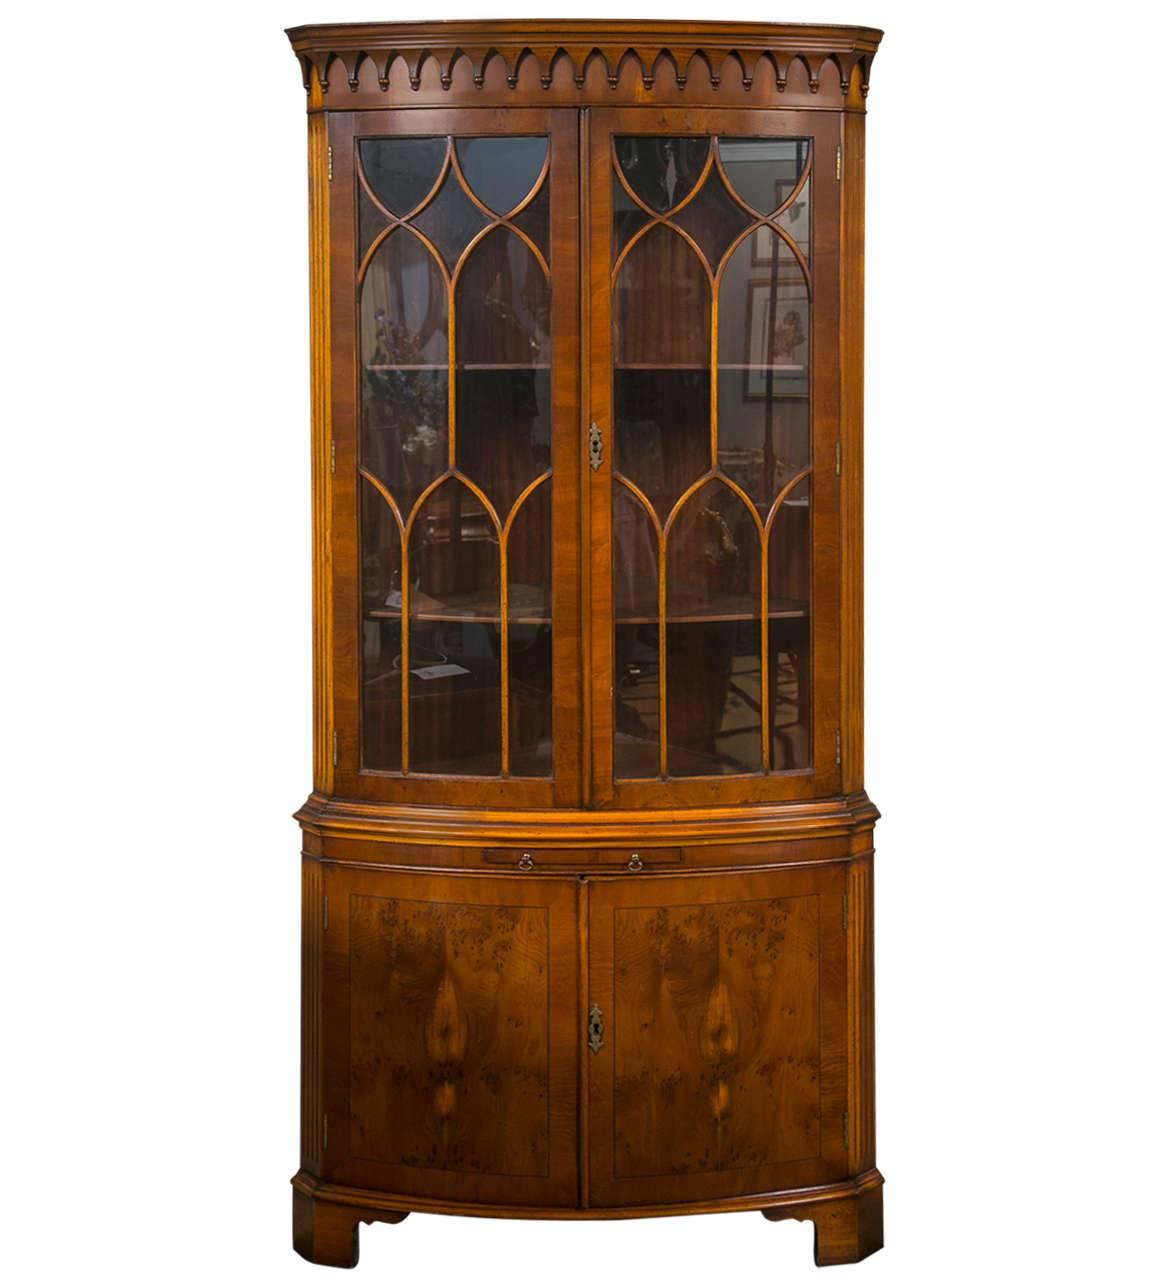 English Bow Front Corner Cabinet by Bevan Funnell